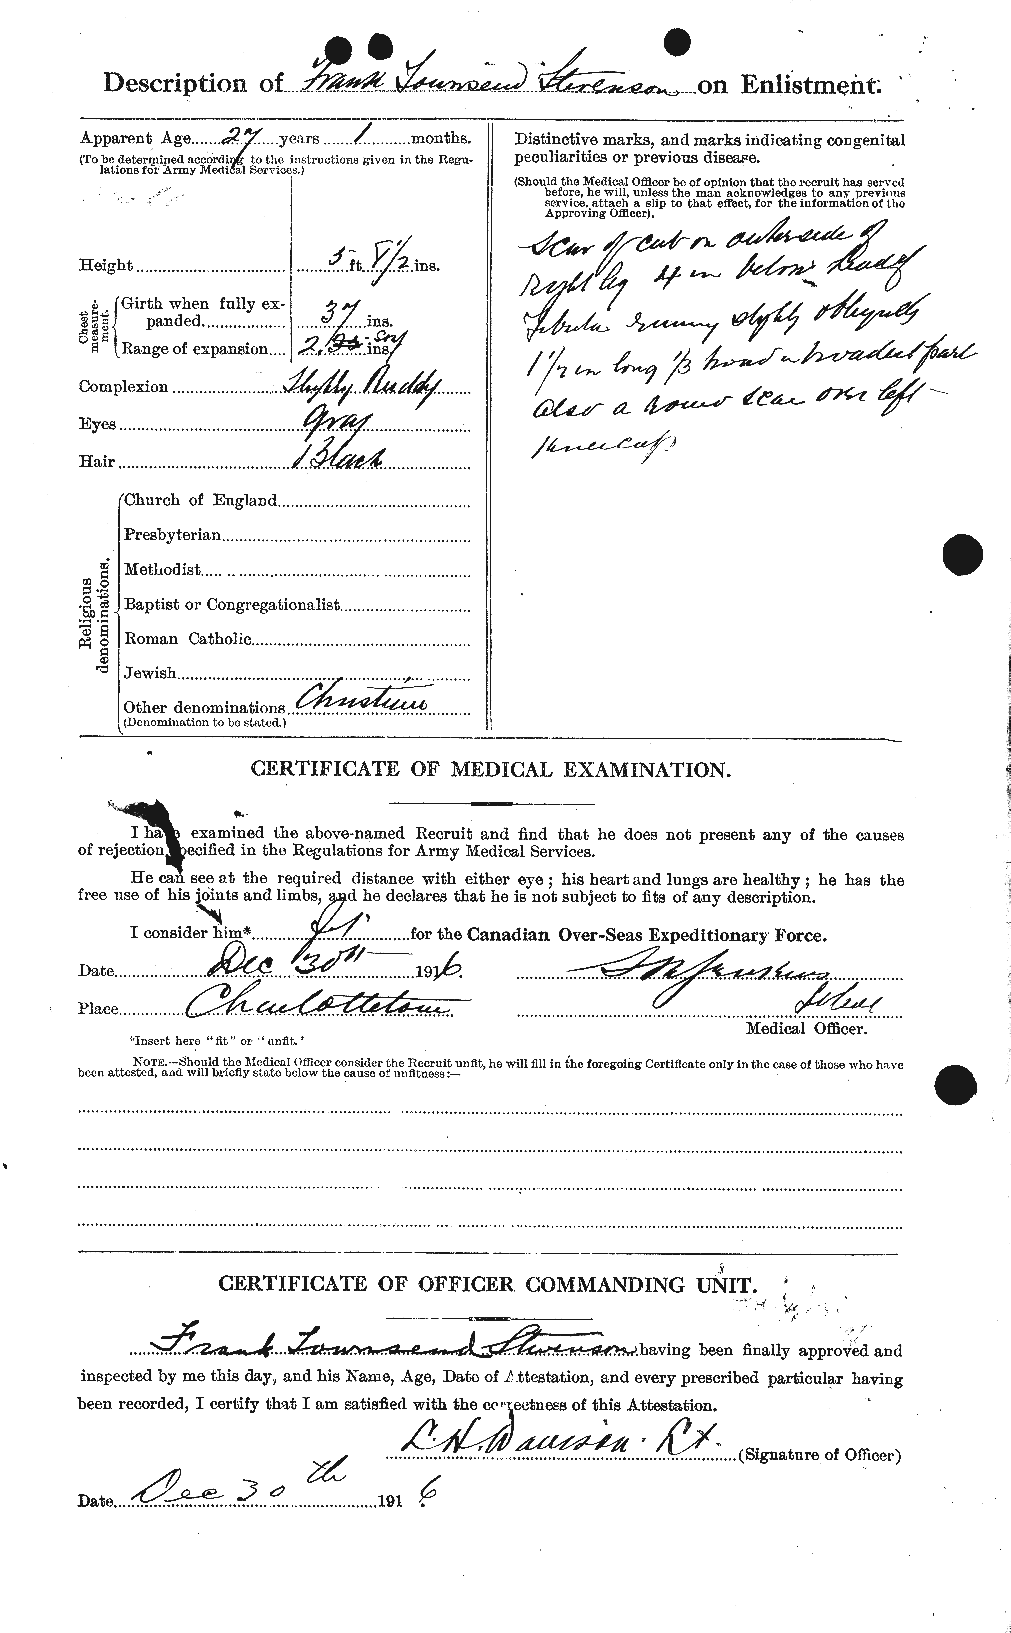 Personnel Records of the First World War - CEF 119112b